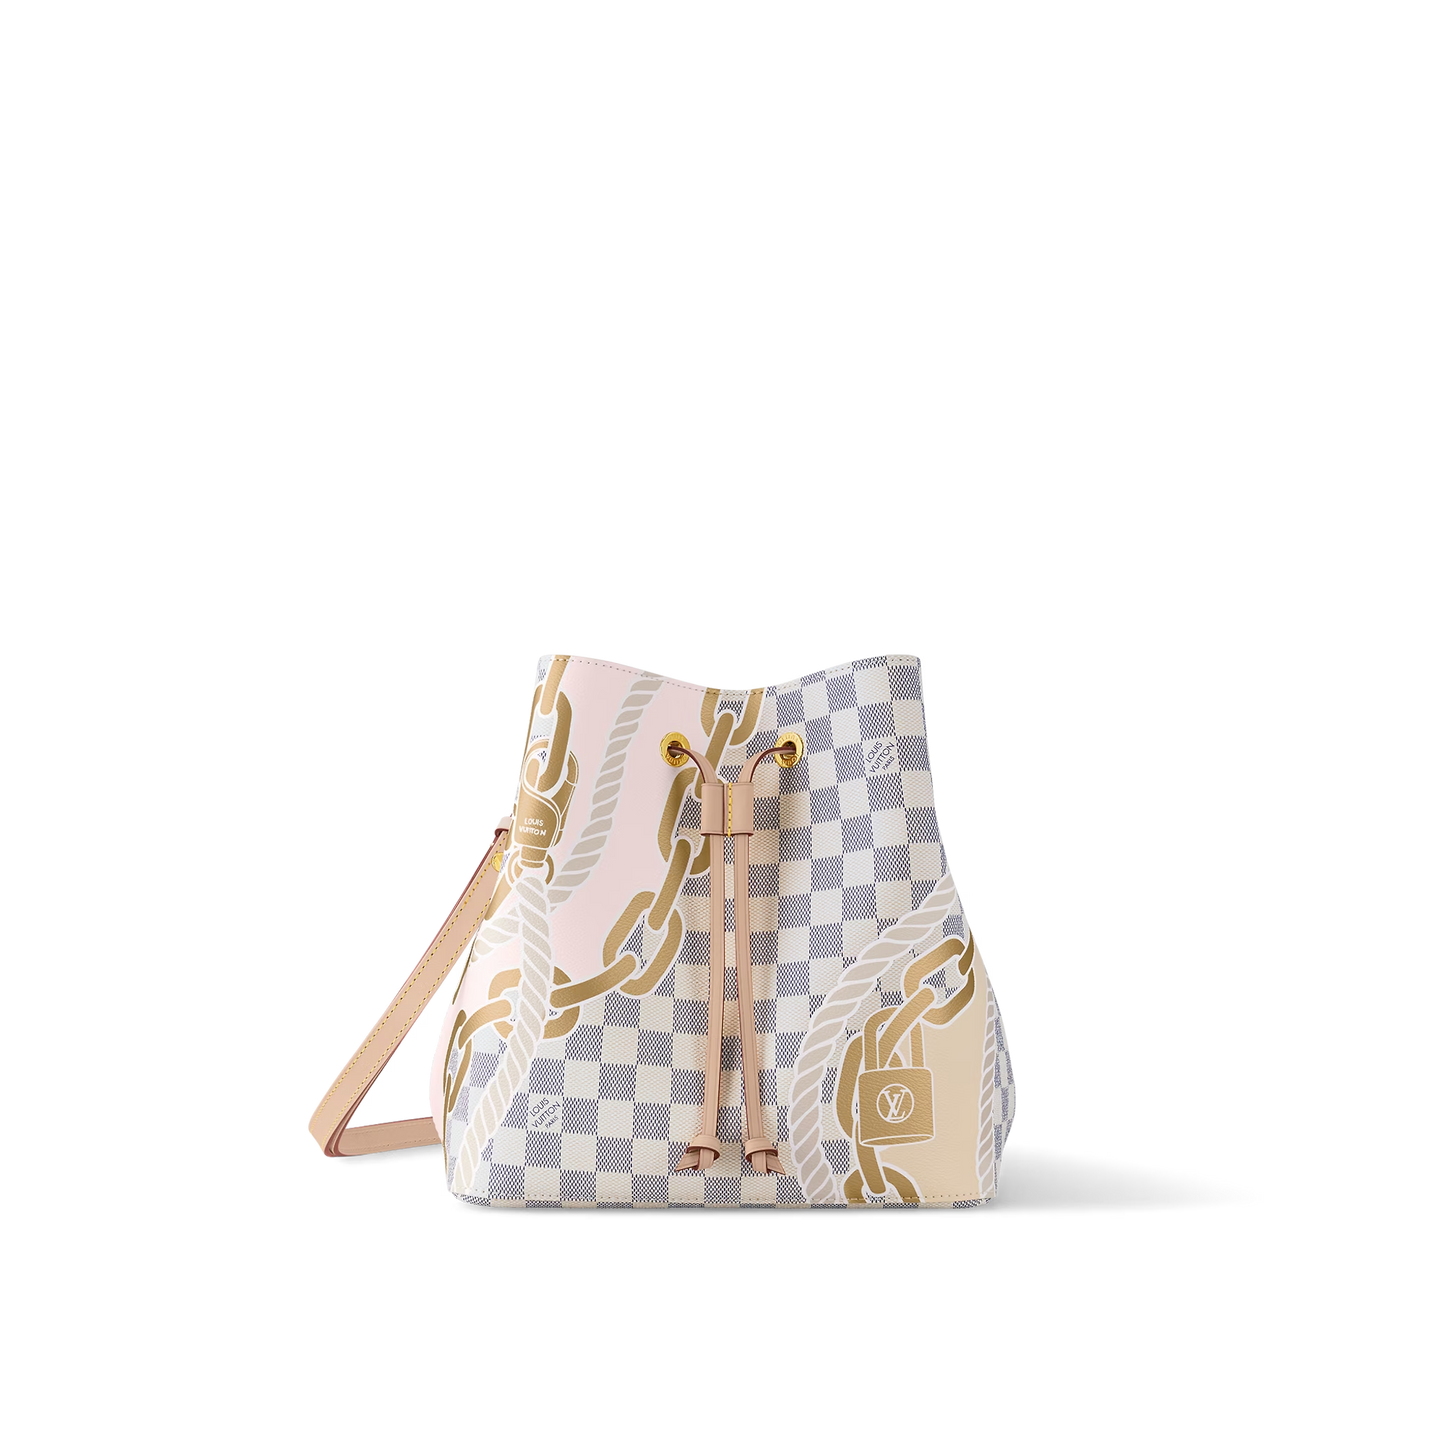 LOUIS VUITTON Monogram Neo Noe MM Bucket Bag, Video published by Luxie  Moxie